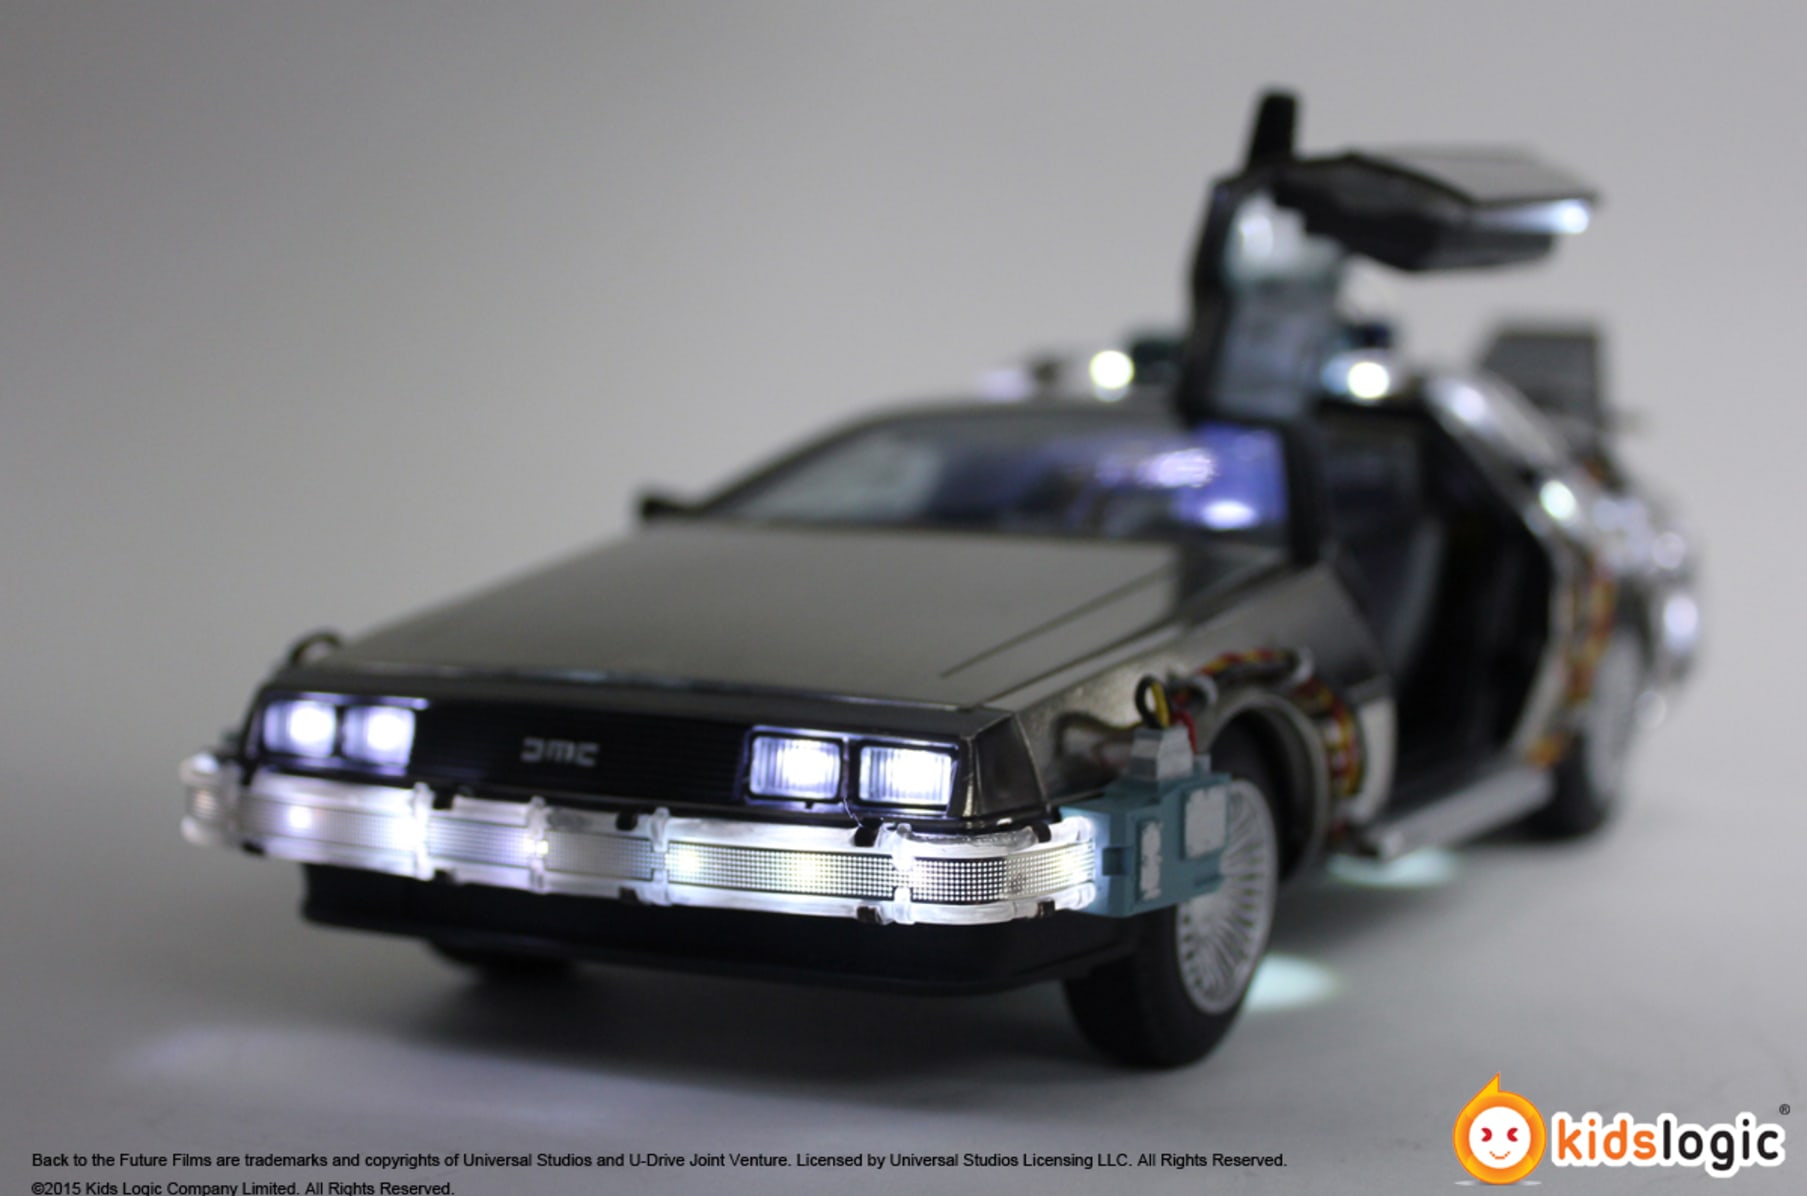 floating delorean toy